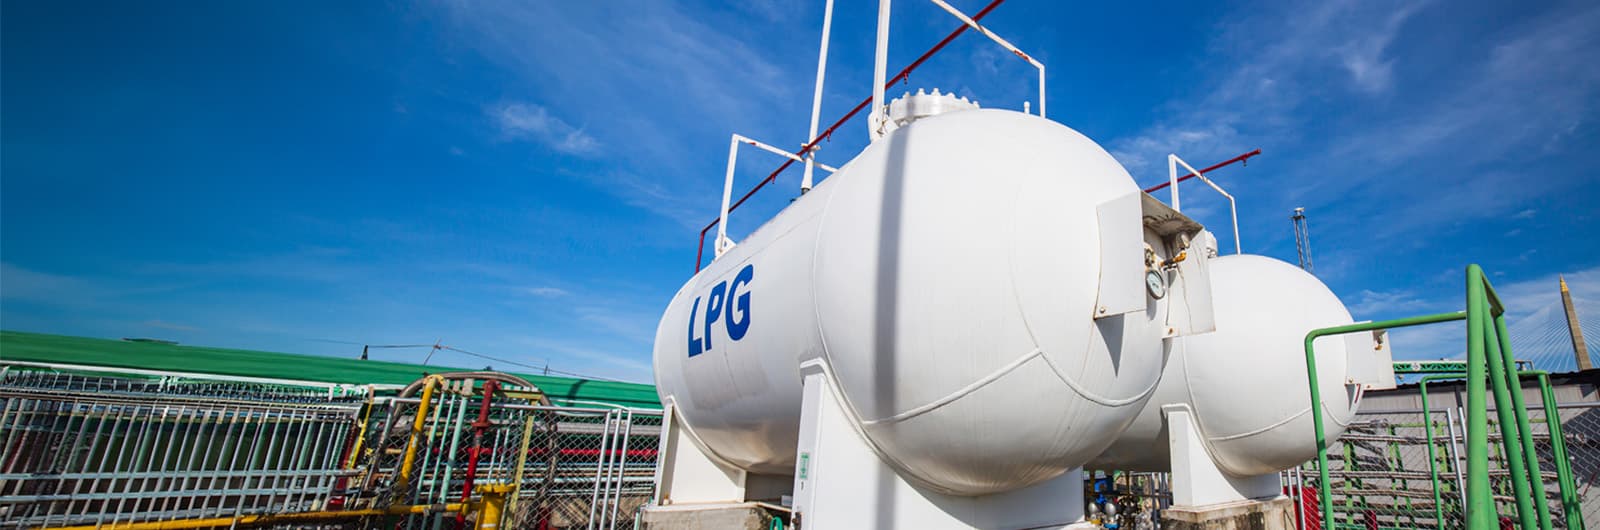 Argus Russian LPG and Condensate